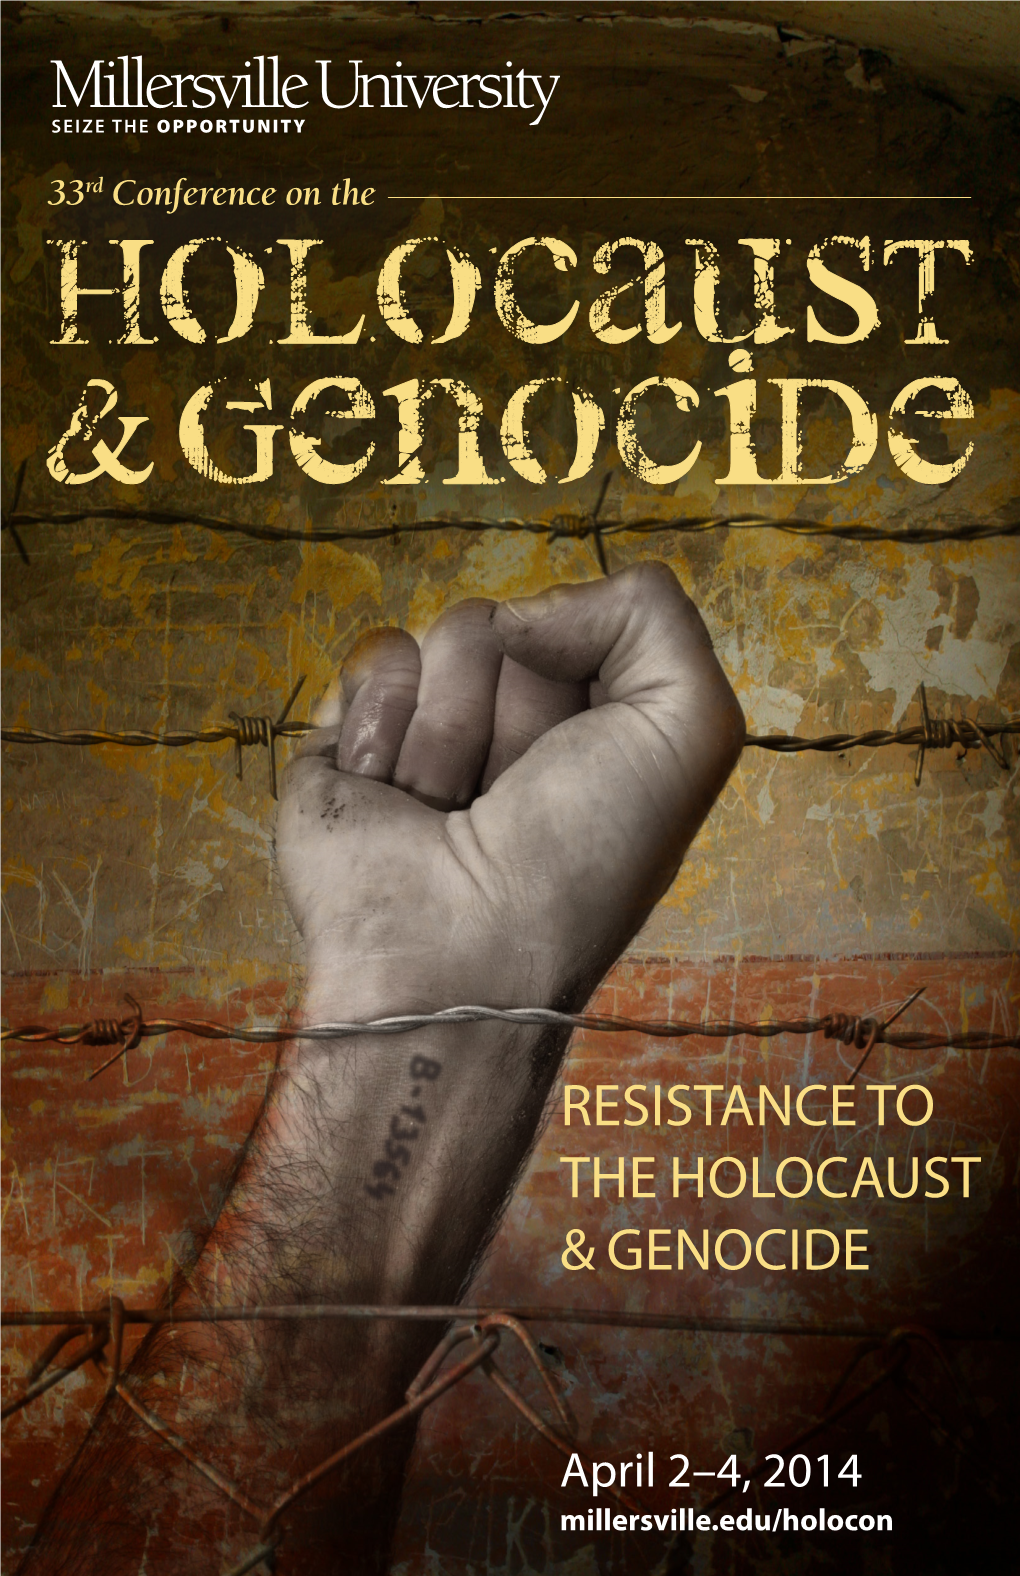 Resistance to the Holocaust & Genocide